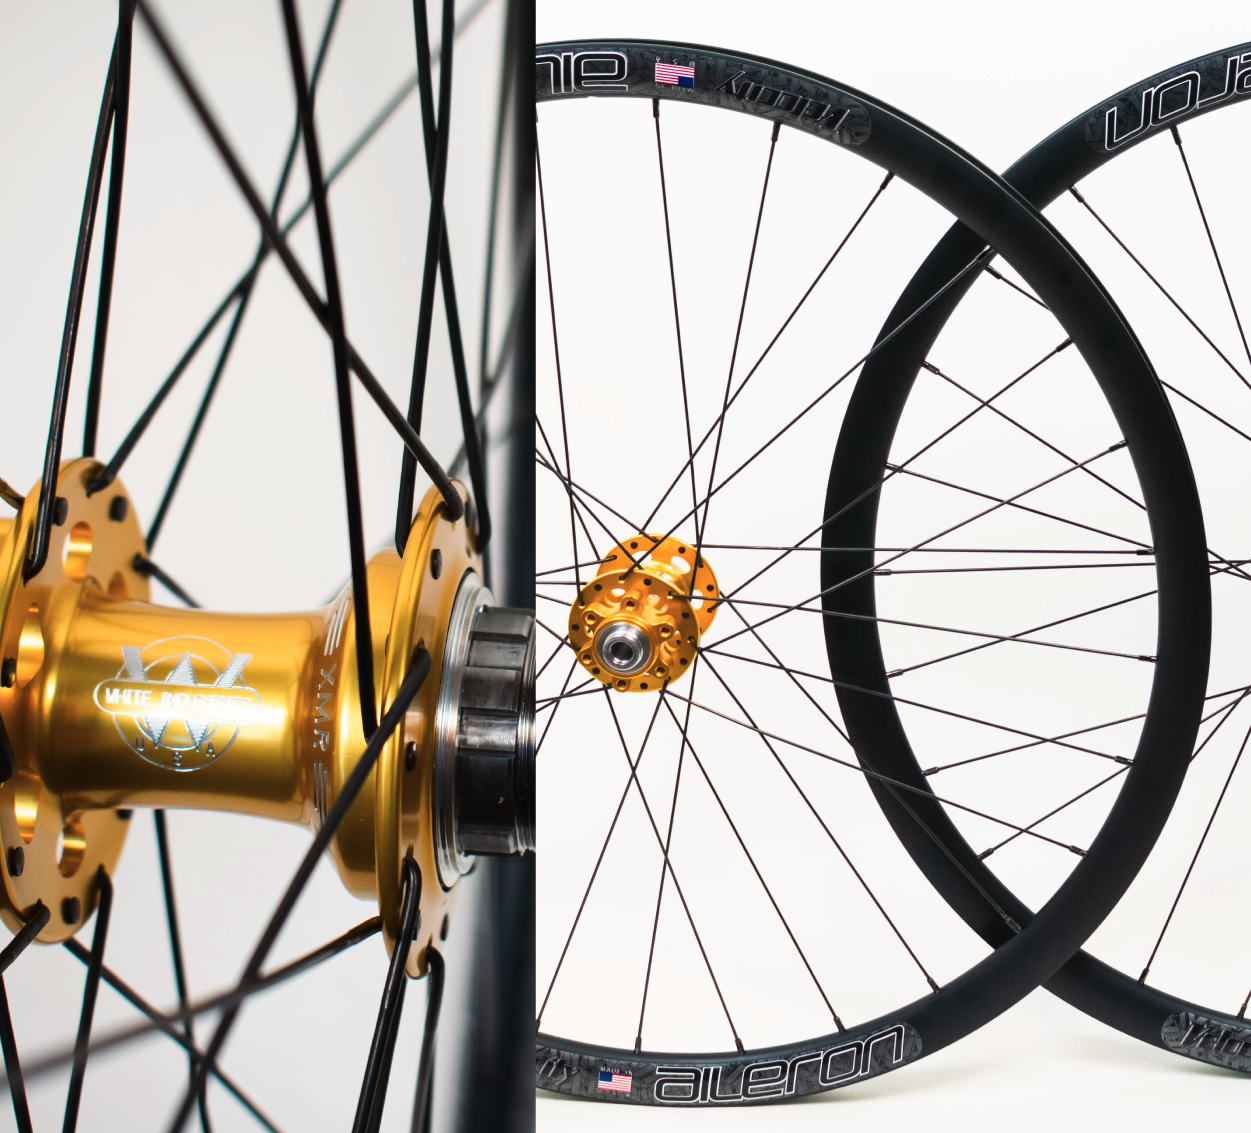 Wheel Build Feature: The Versatility of White Industries CLD Hubs